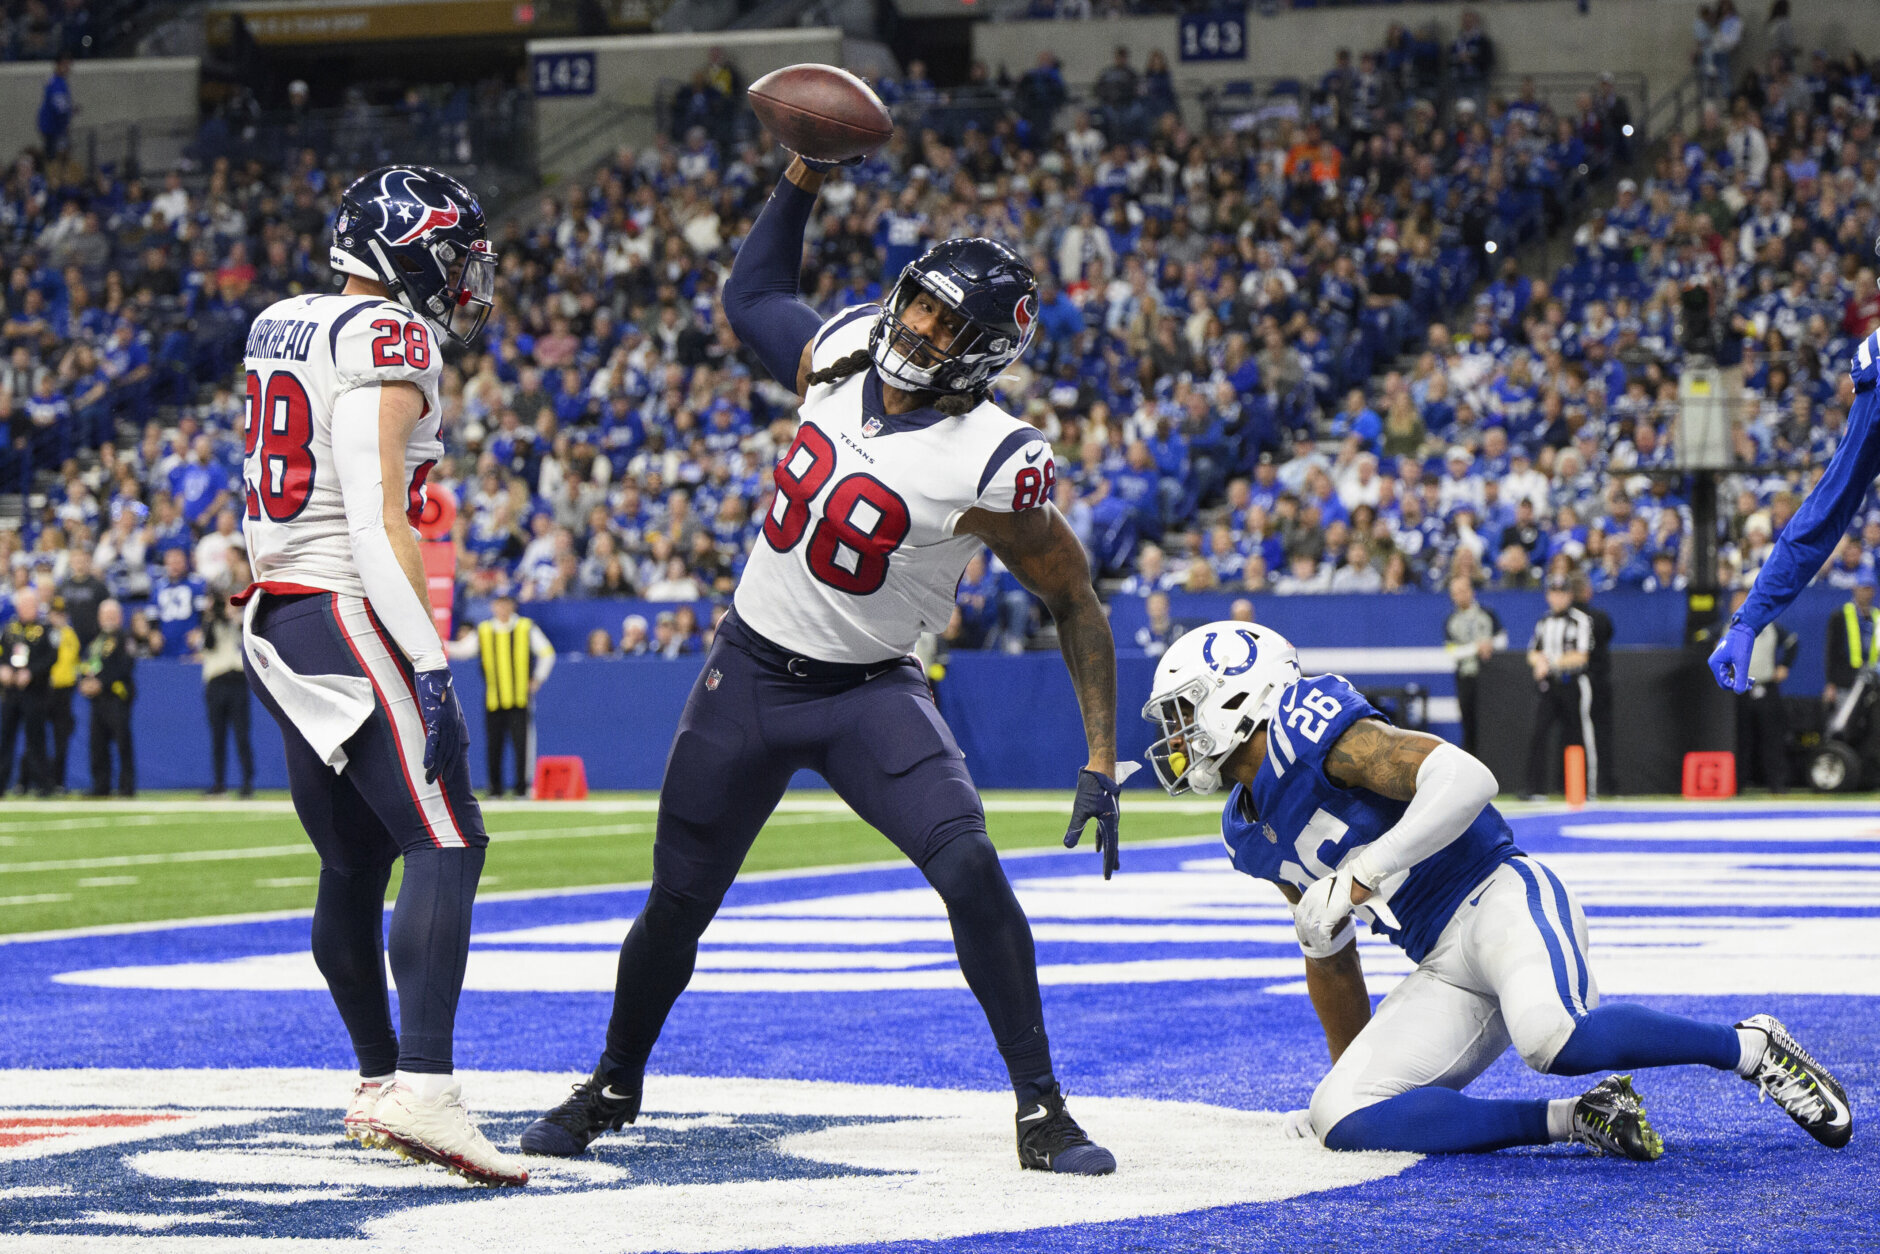 <p><b><i>Texans 32</i></b><br />
<b><i>Colts 31</i></b></p>
<p>This thrilling finish cost Houston the No. 1 overall pick and <a href="https://wtop.com/nfl/2023/01/houston-texans-fire-lovie-smith-after-just-one-season/" target="_blank" rel="noopener">Lovie Smith his job</a>. It should also prompt Indy to be fined and docked draft picks for ever making this Jeff Saturday decision.</p>
